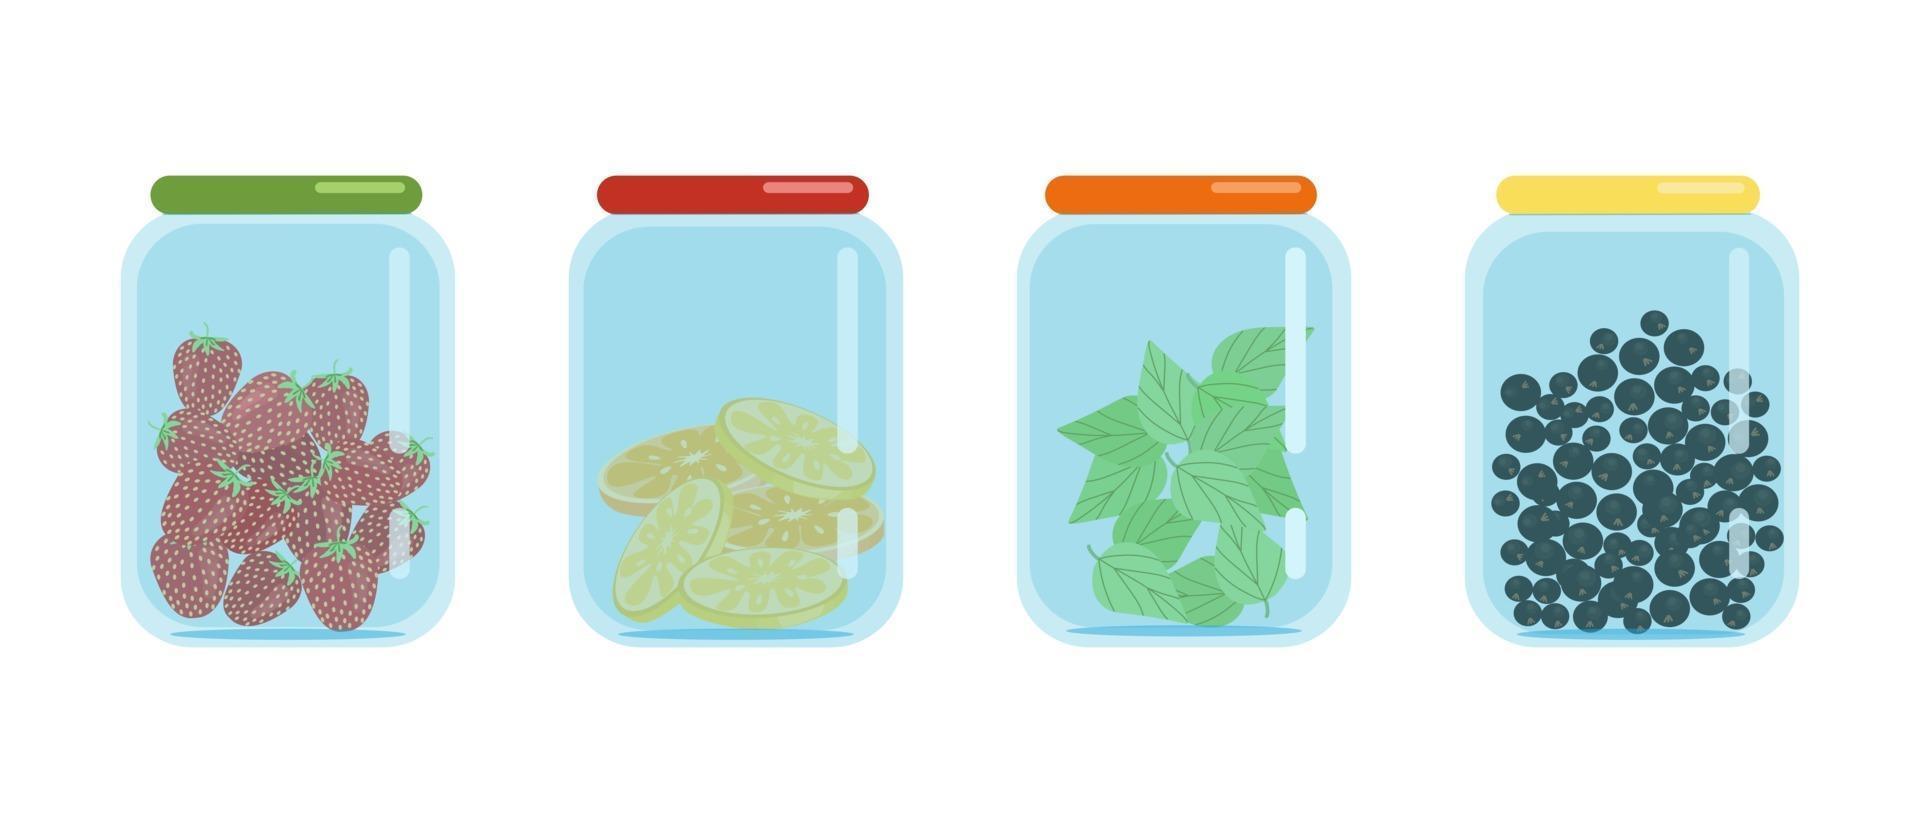 Glass jars closed with lids filled with dried slices of lemons and oranges black currants and strawberries dried fruit blanks vector illustration in flat style isolate cartoon